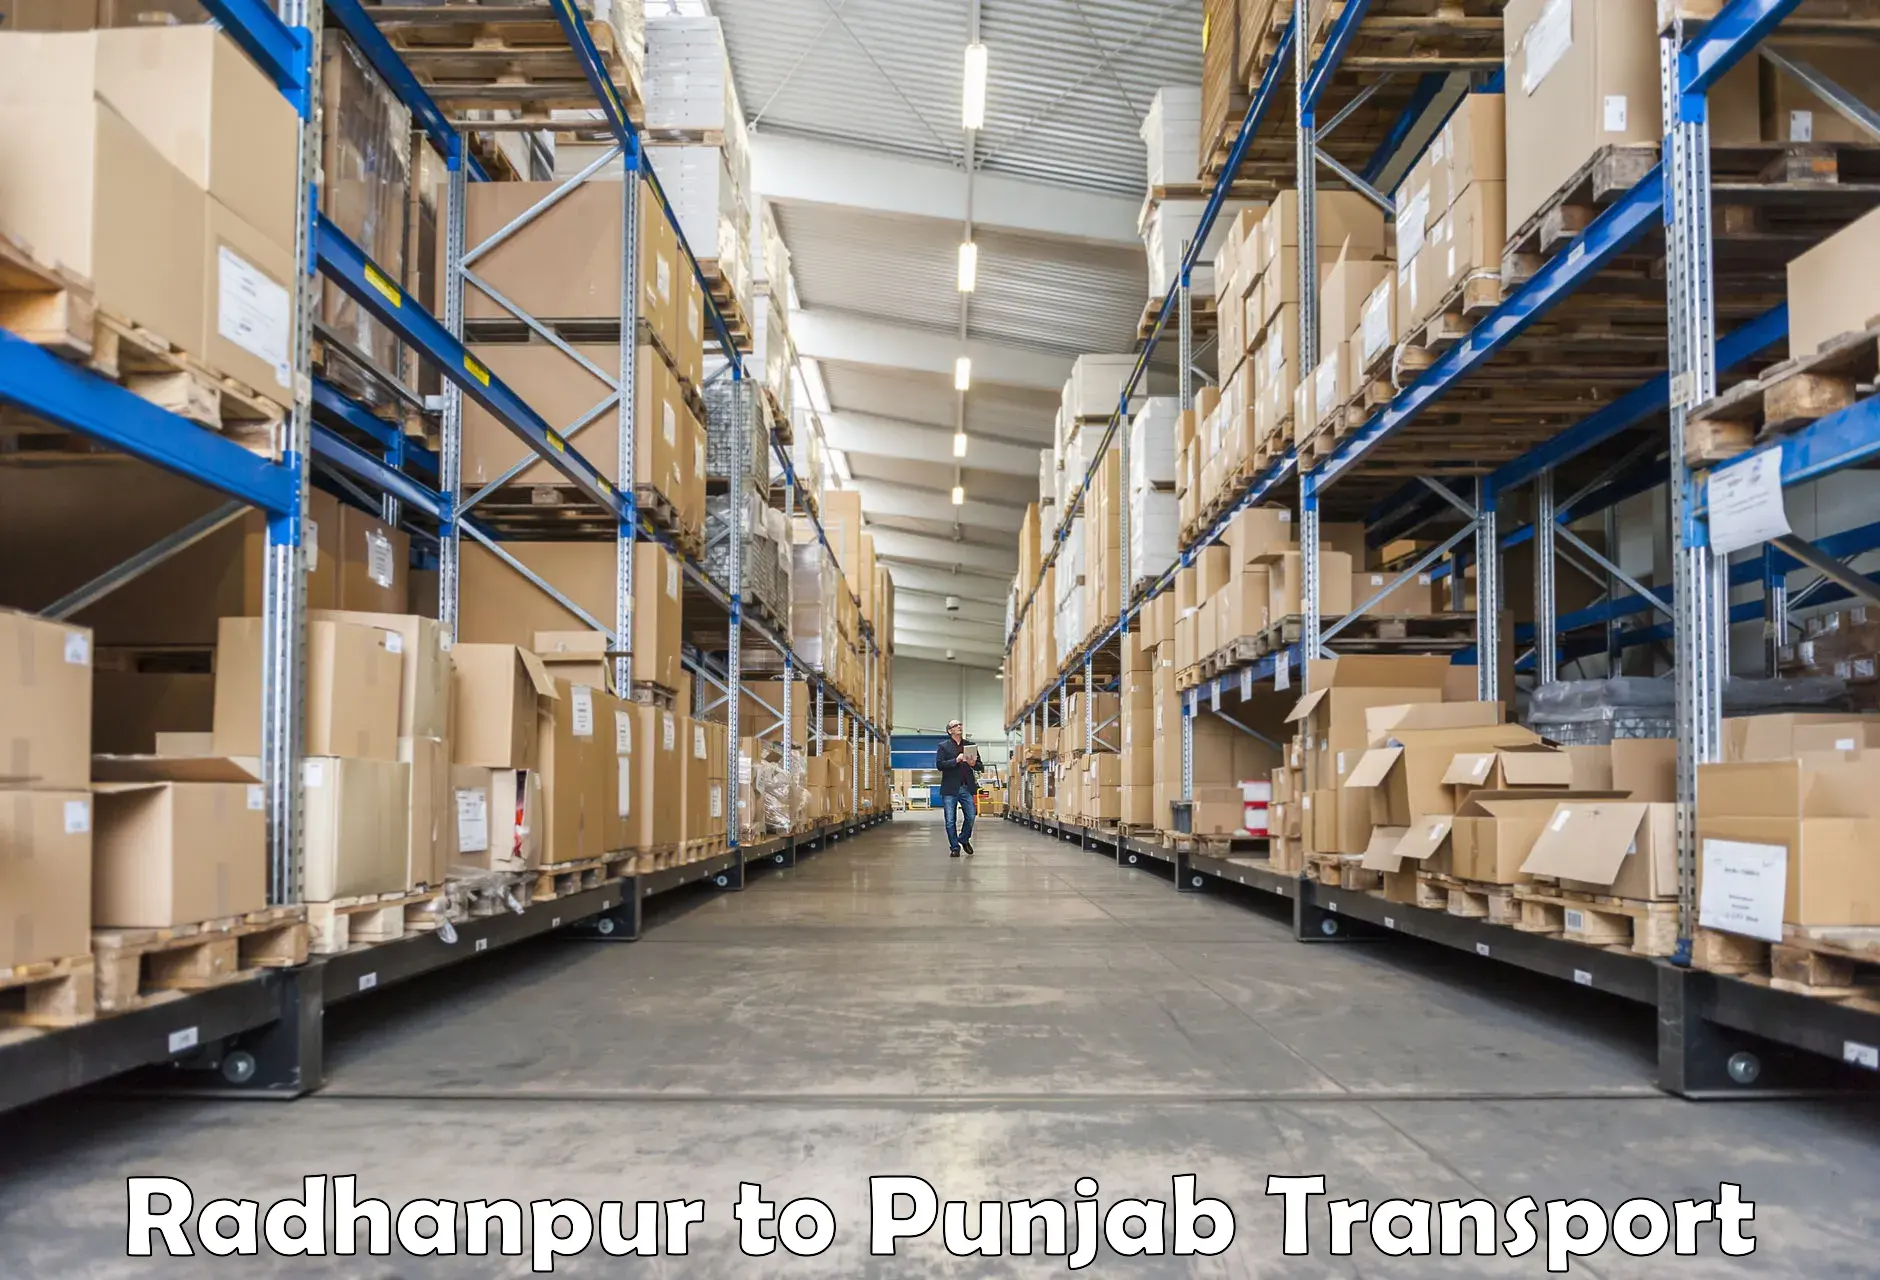 Vehicle transport services in Radhanpur to Goindwal Sahib